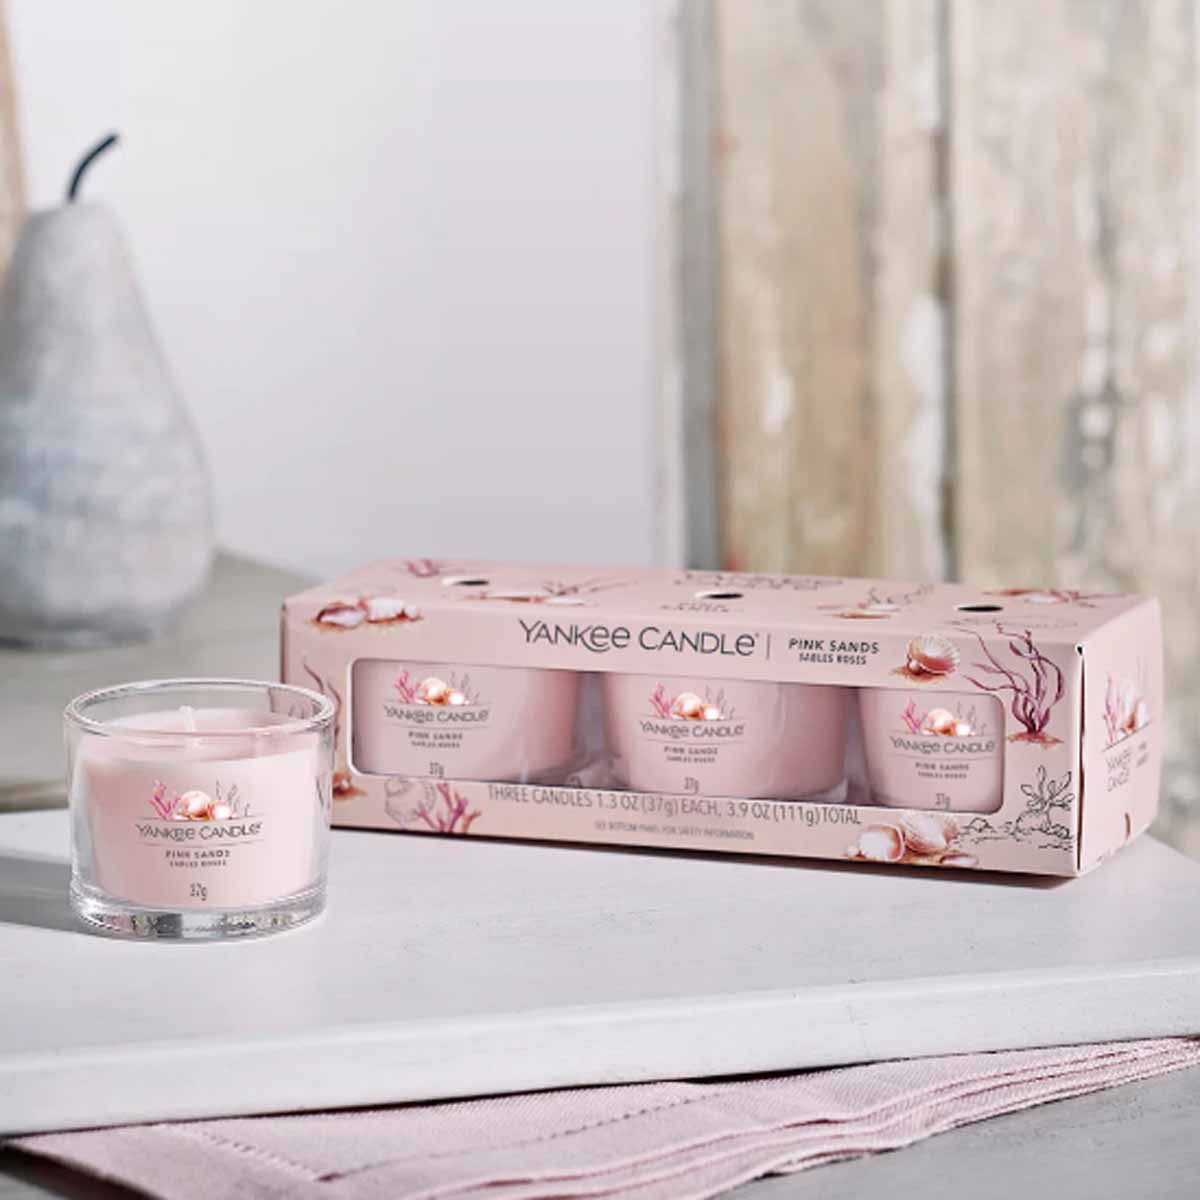 Yankee Candle Signature Pink Sands 3 candele votive in vetro